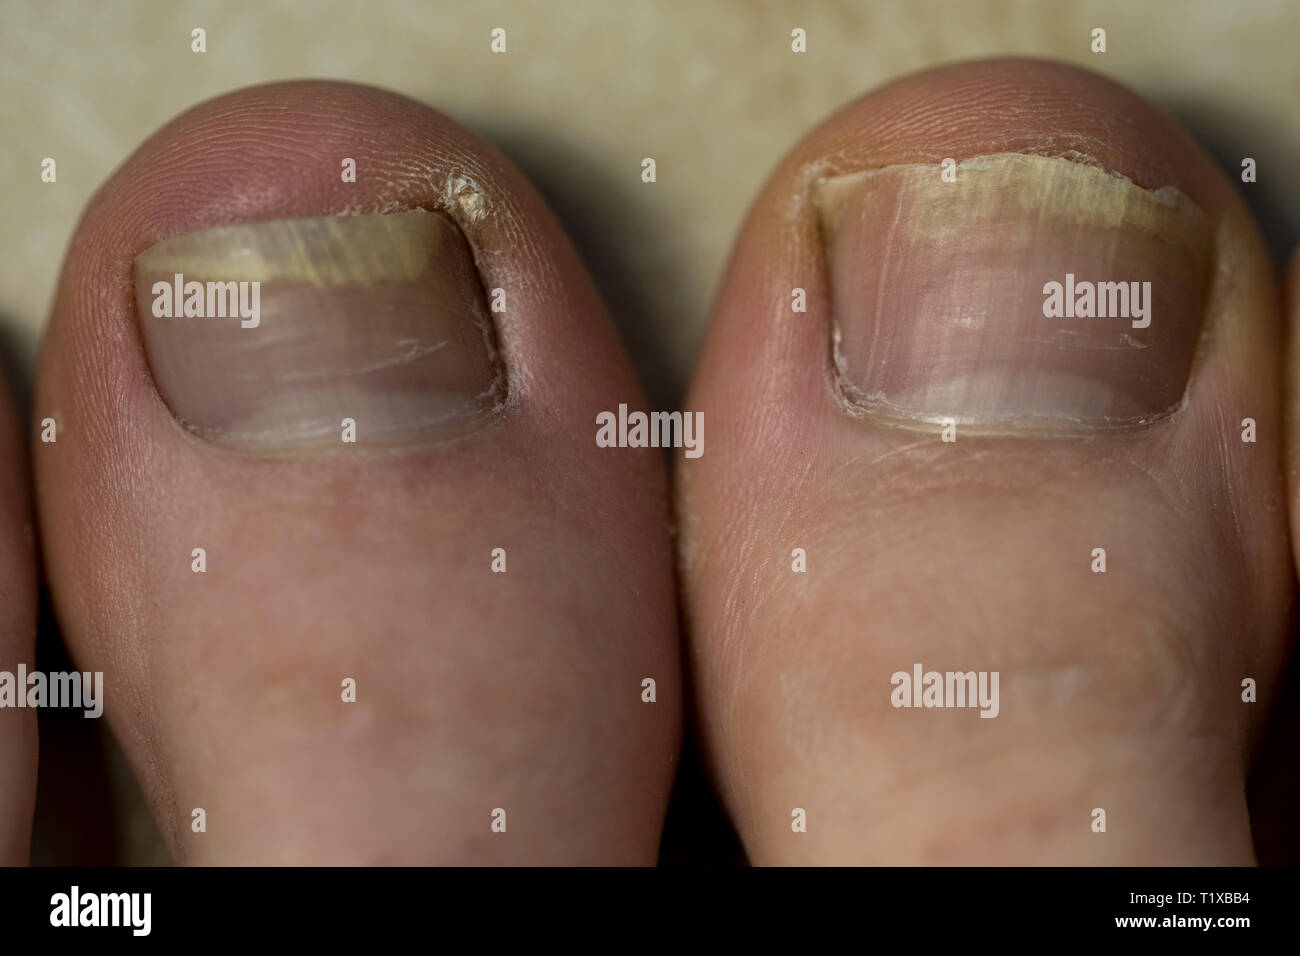 Big toenails close up with damage from shoes. Foot health and wellness treatment. Stock Photo